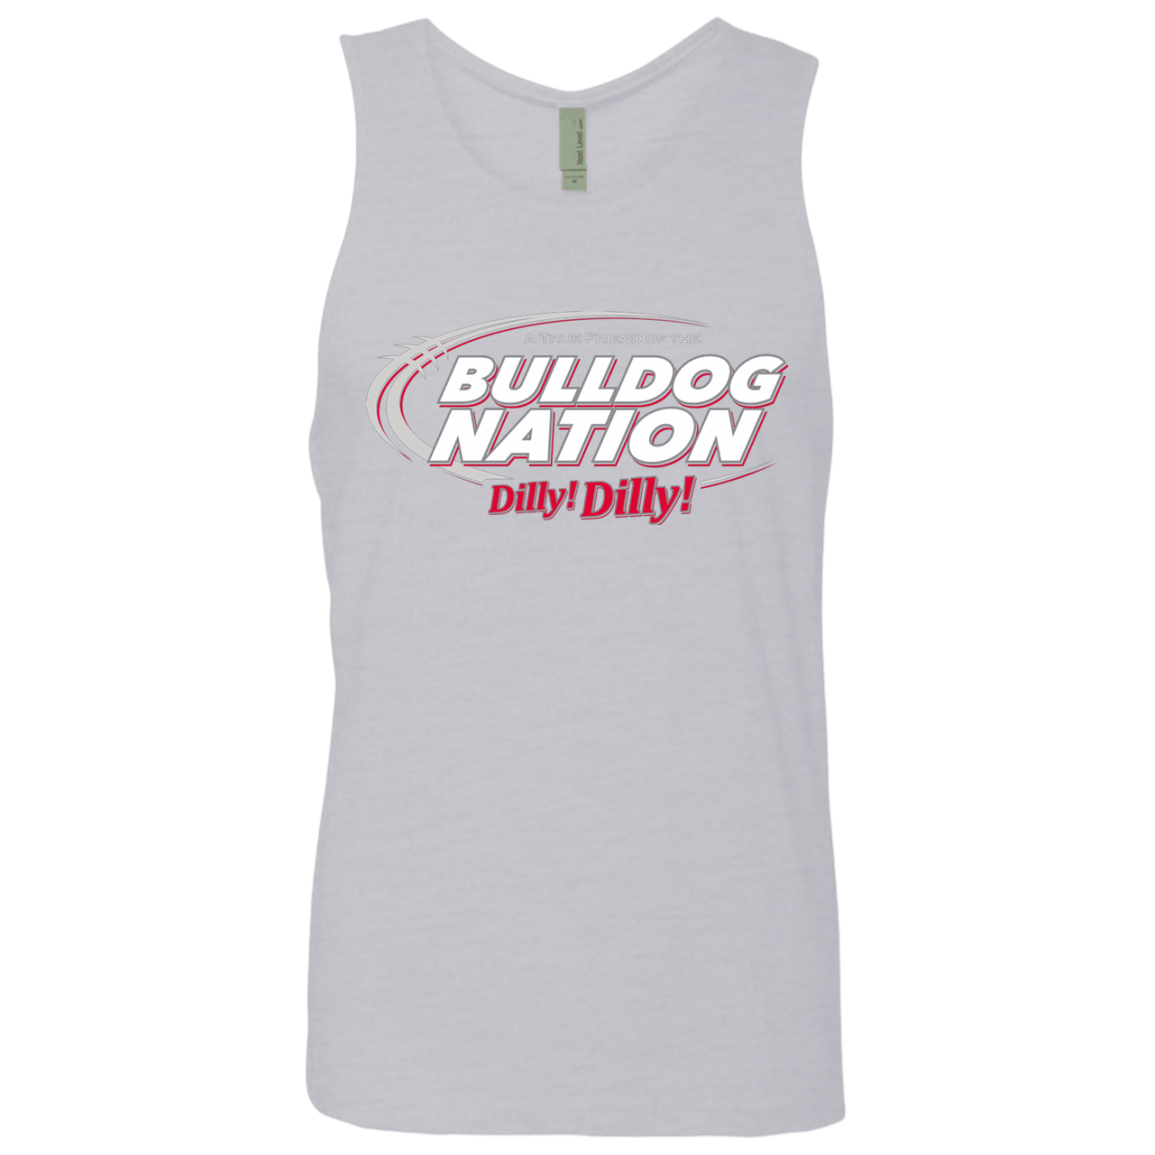 T-Shirts Heather Grey / Small Georgia Dilly Dilly Men's Premium Tank Top